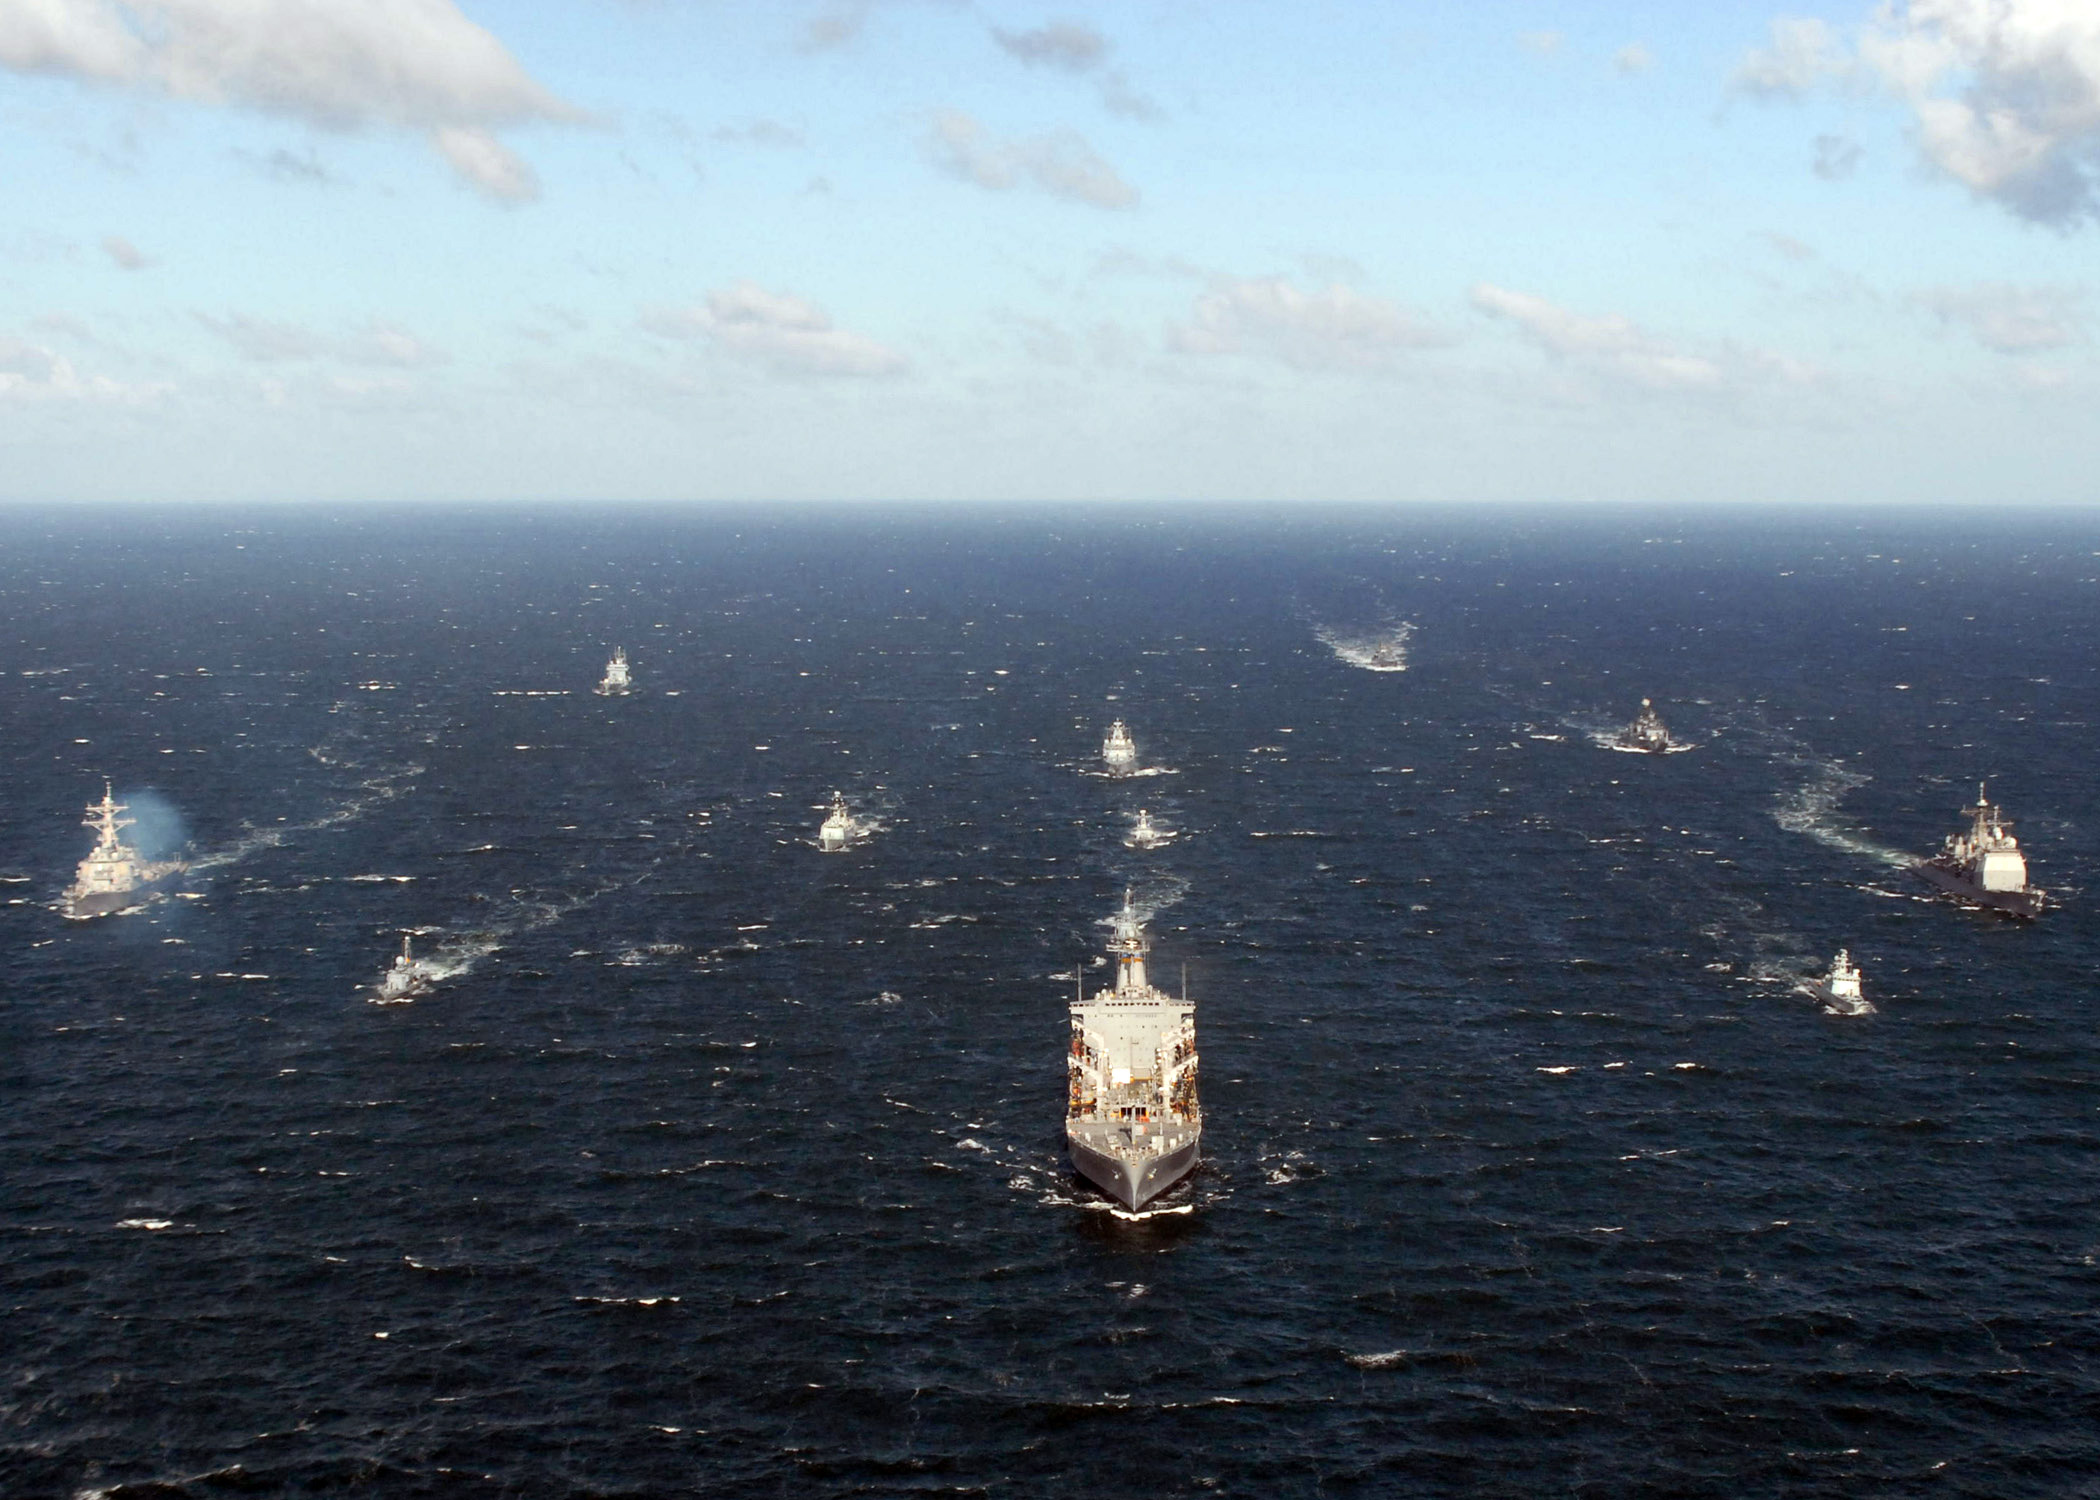 US_Navy_080611-N-3396B-129_Ships_from_various_navies_participating_in_Baltic_Operations_%28BALTOPS%29_maneuver_into_formation.jpg